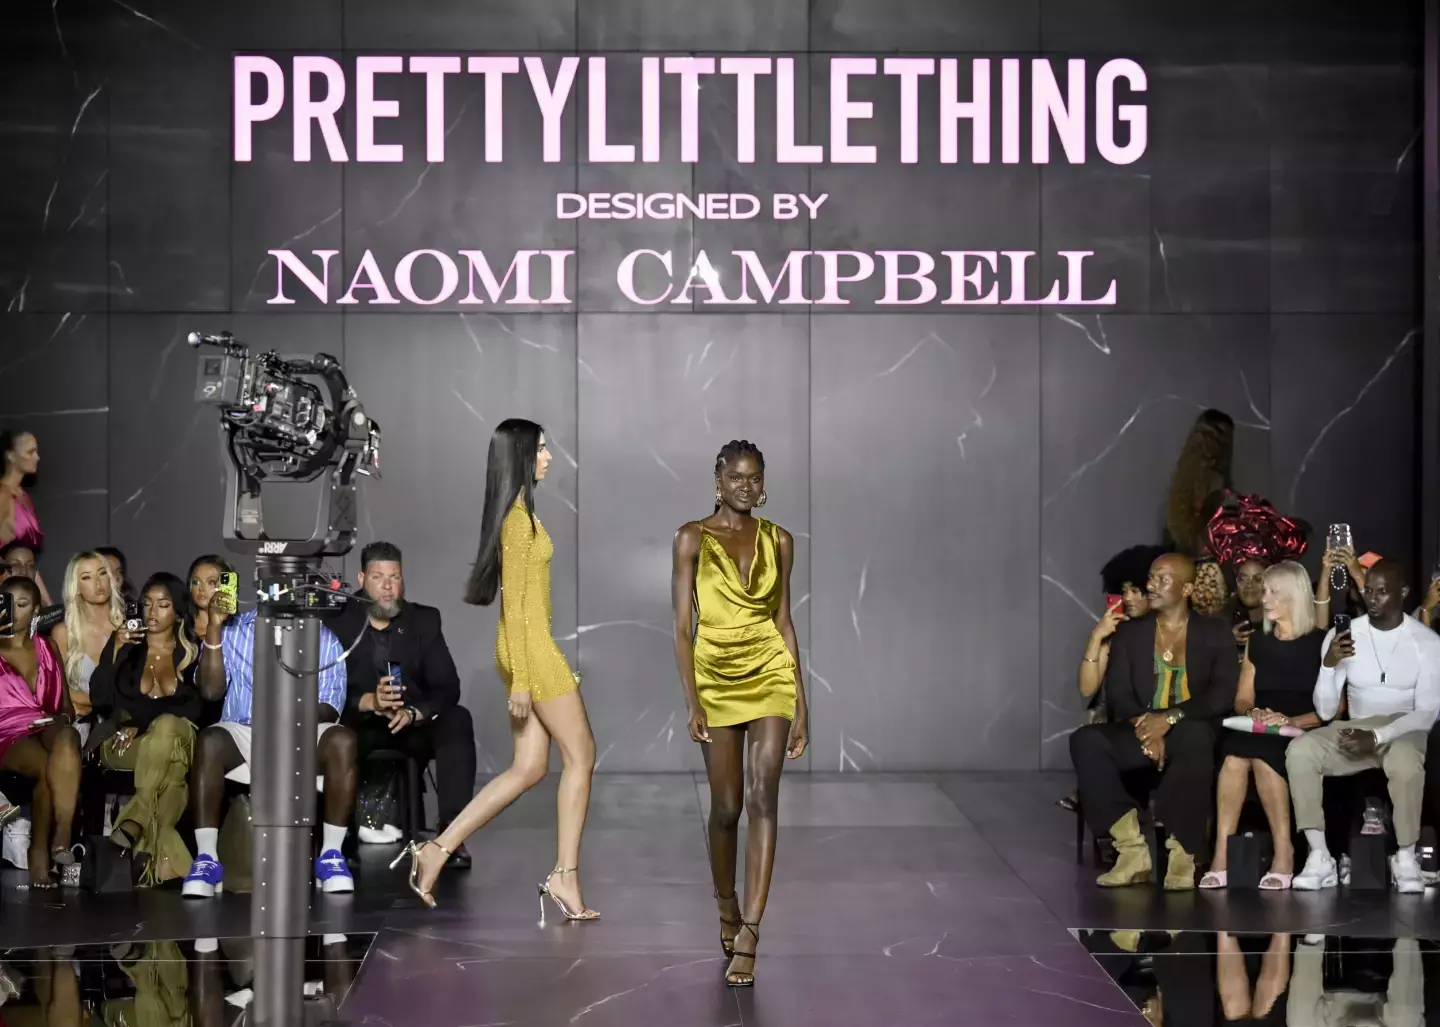 FASHION PHOTOS: Naomi Campbell struts the runway in shimmery silver in new  fast fashion collab